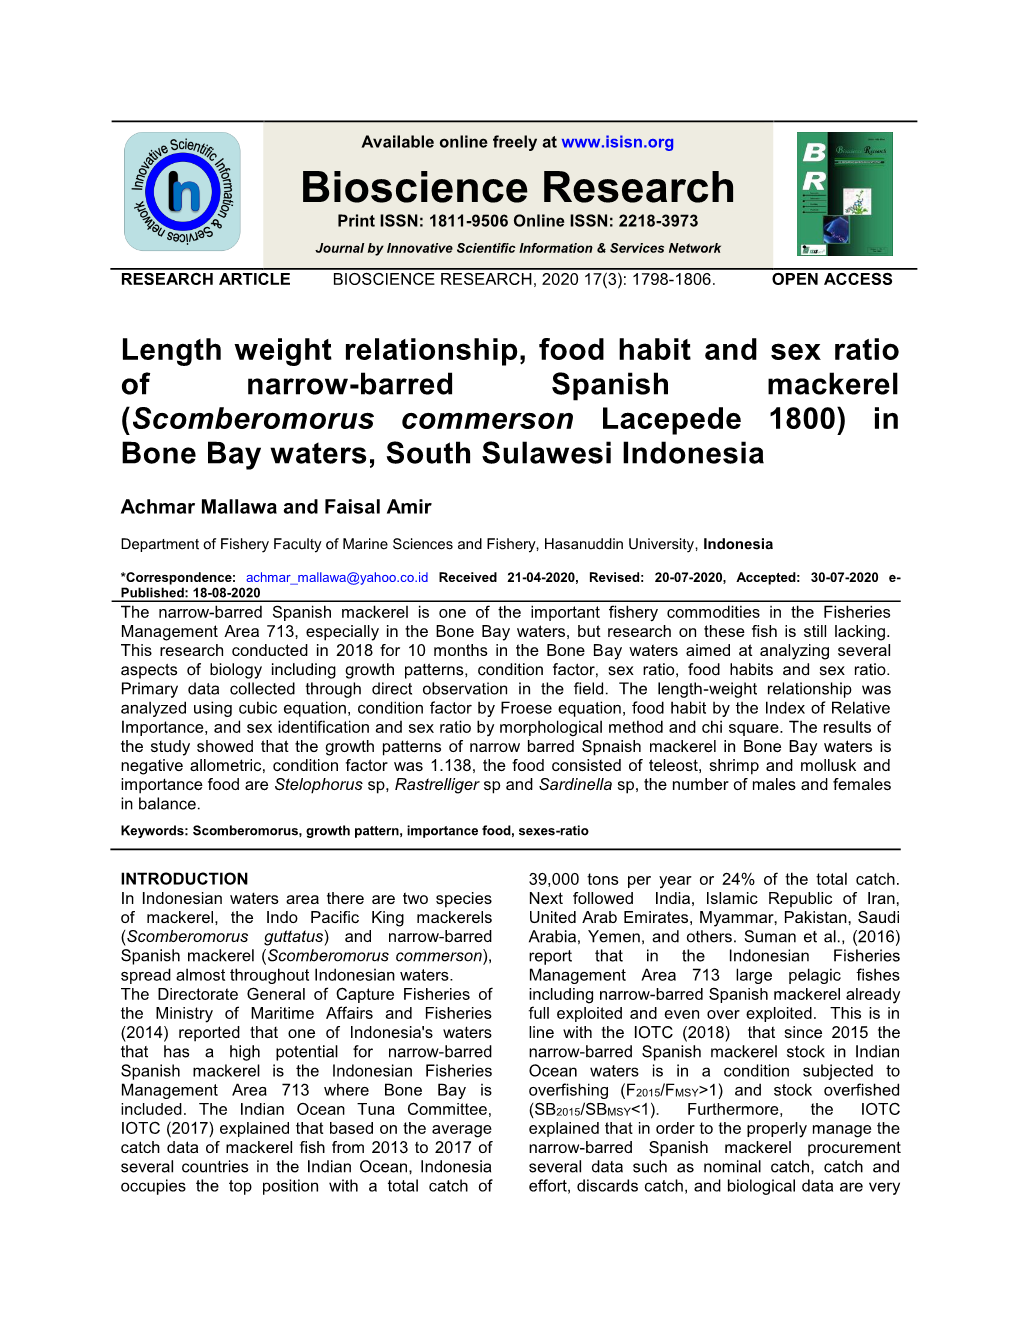 Length Weight Relationship, Food Habit and Sex Ratio of Narrow-Barred